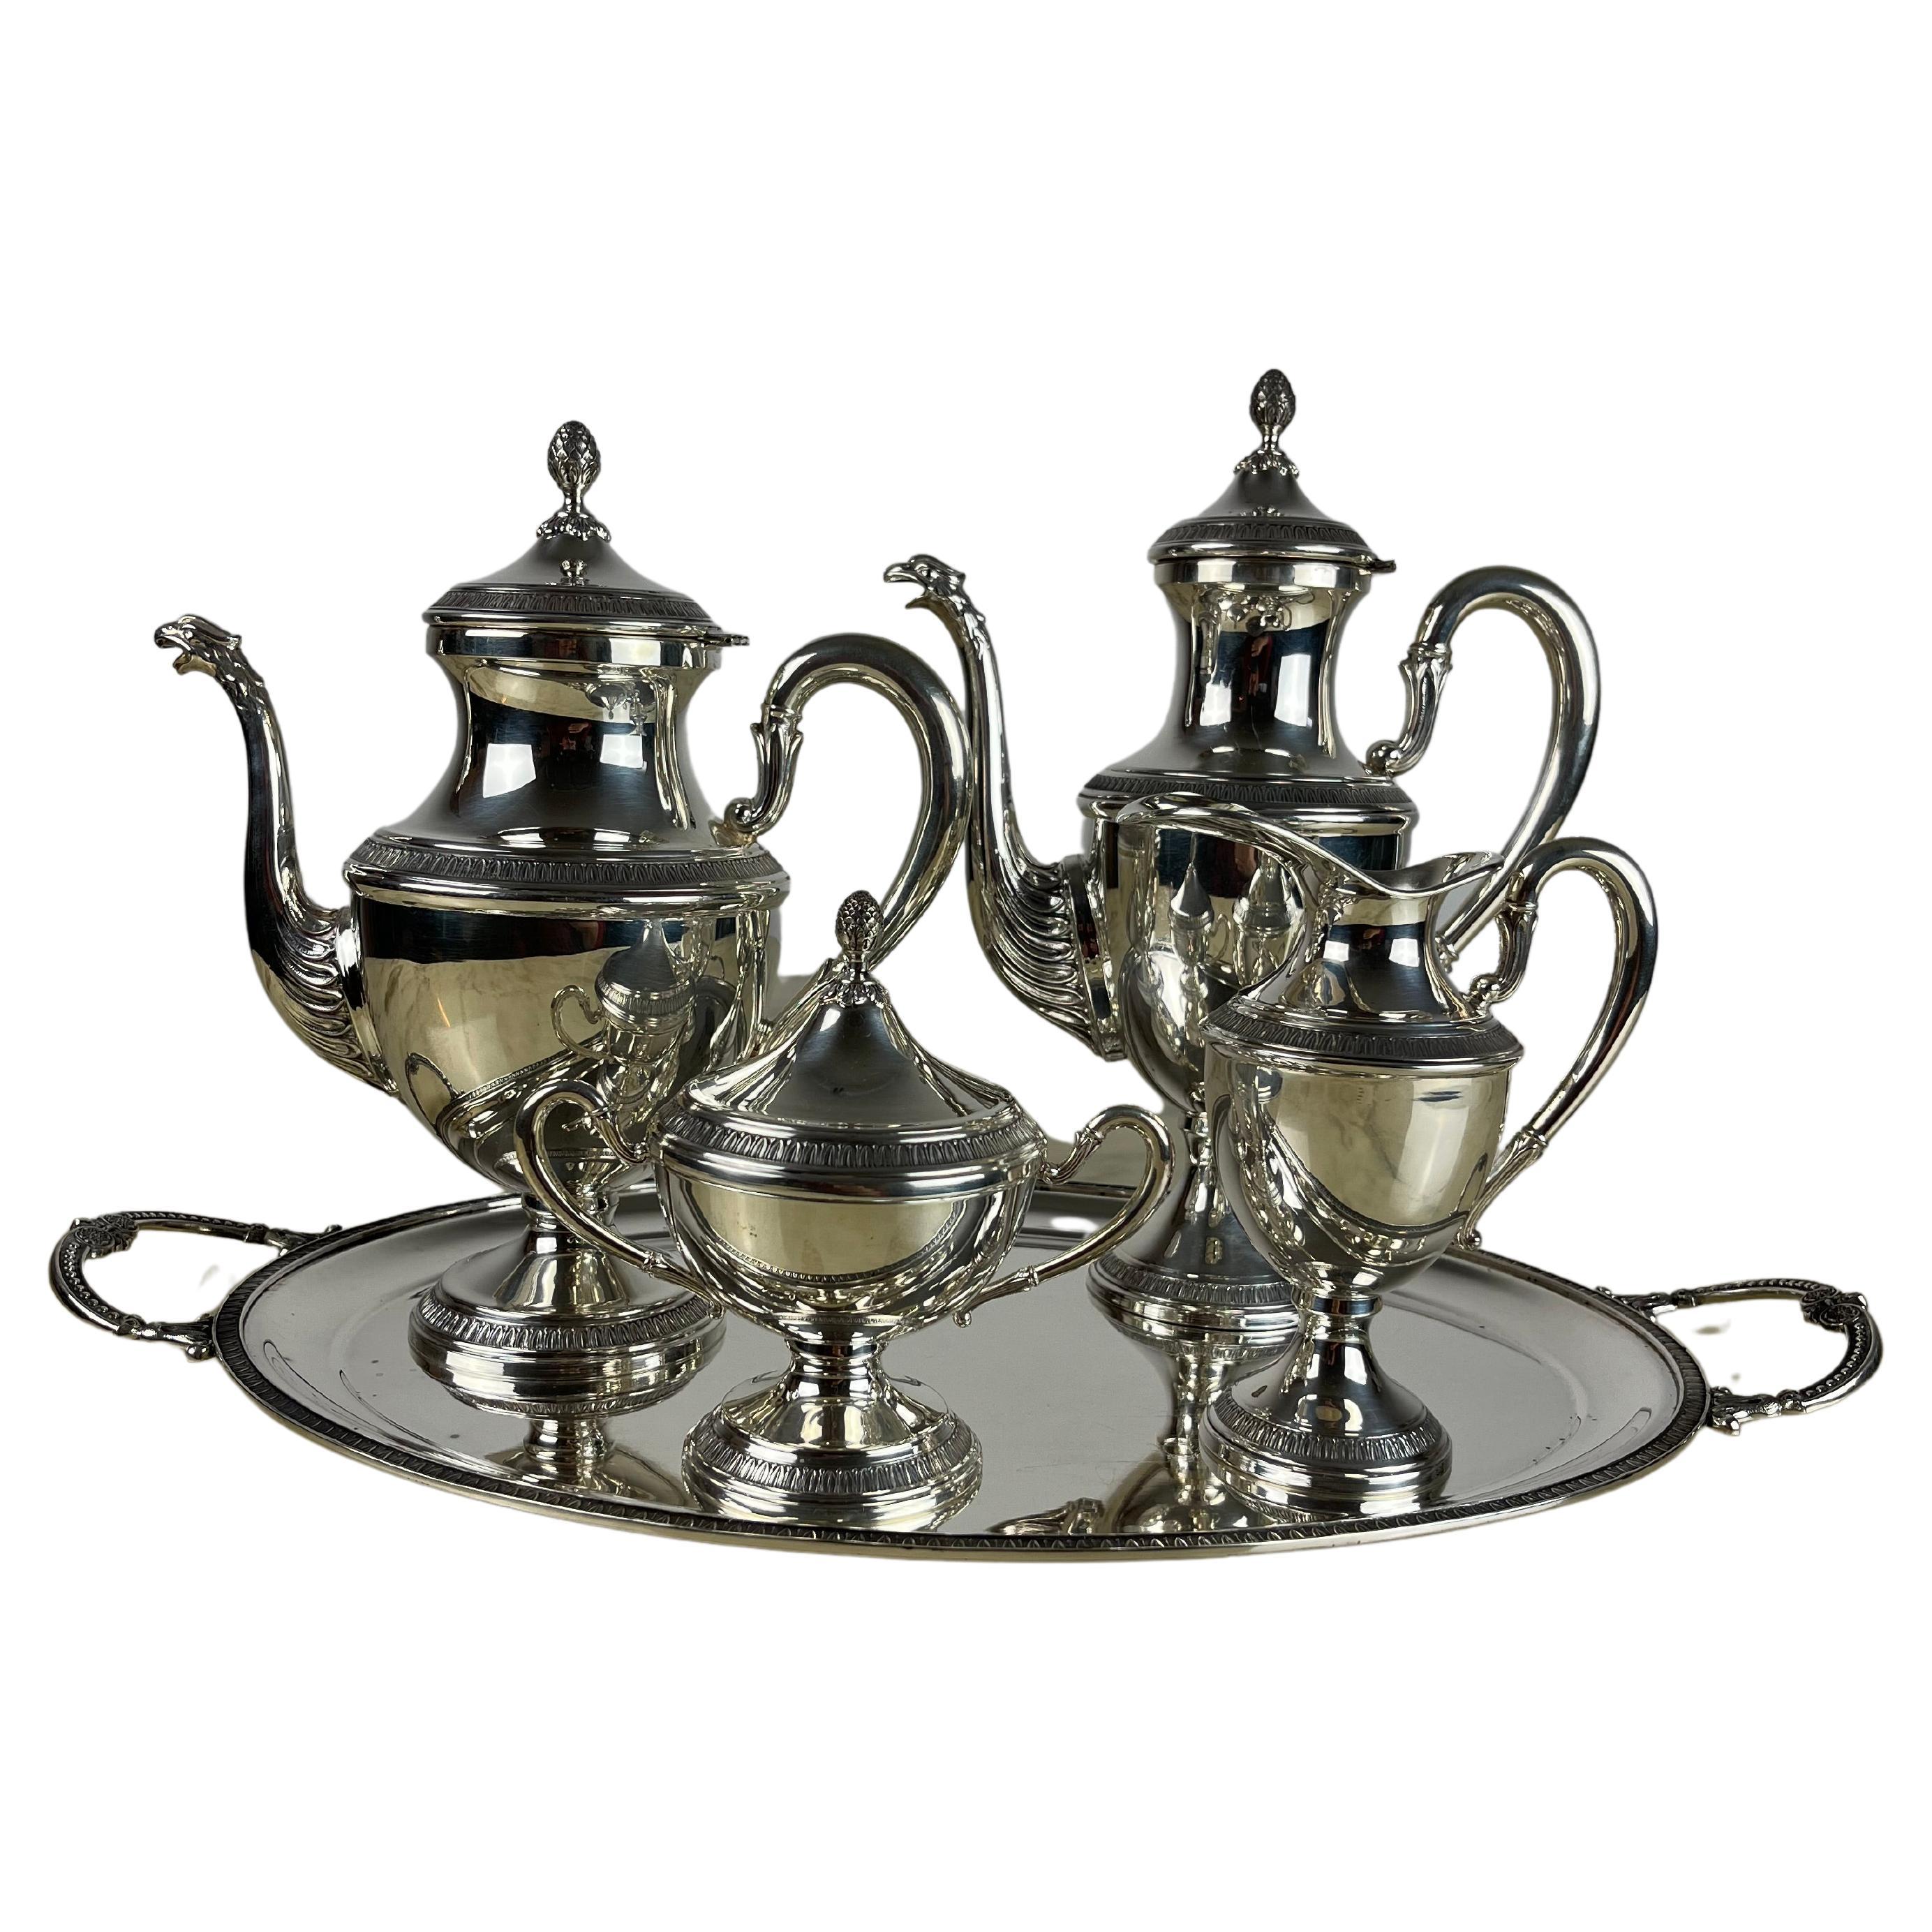 https://a.1stdibscdn.com/4-piece-tea-and-coffee-service-plus-tray-empire-style-800-silver-italy-1980-for-sale/f_83792/f_342970021684219498182/f_34297002_1684219499207_bg_processed.jpg